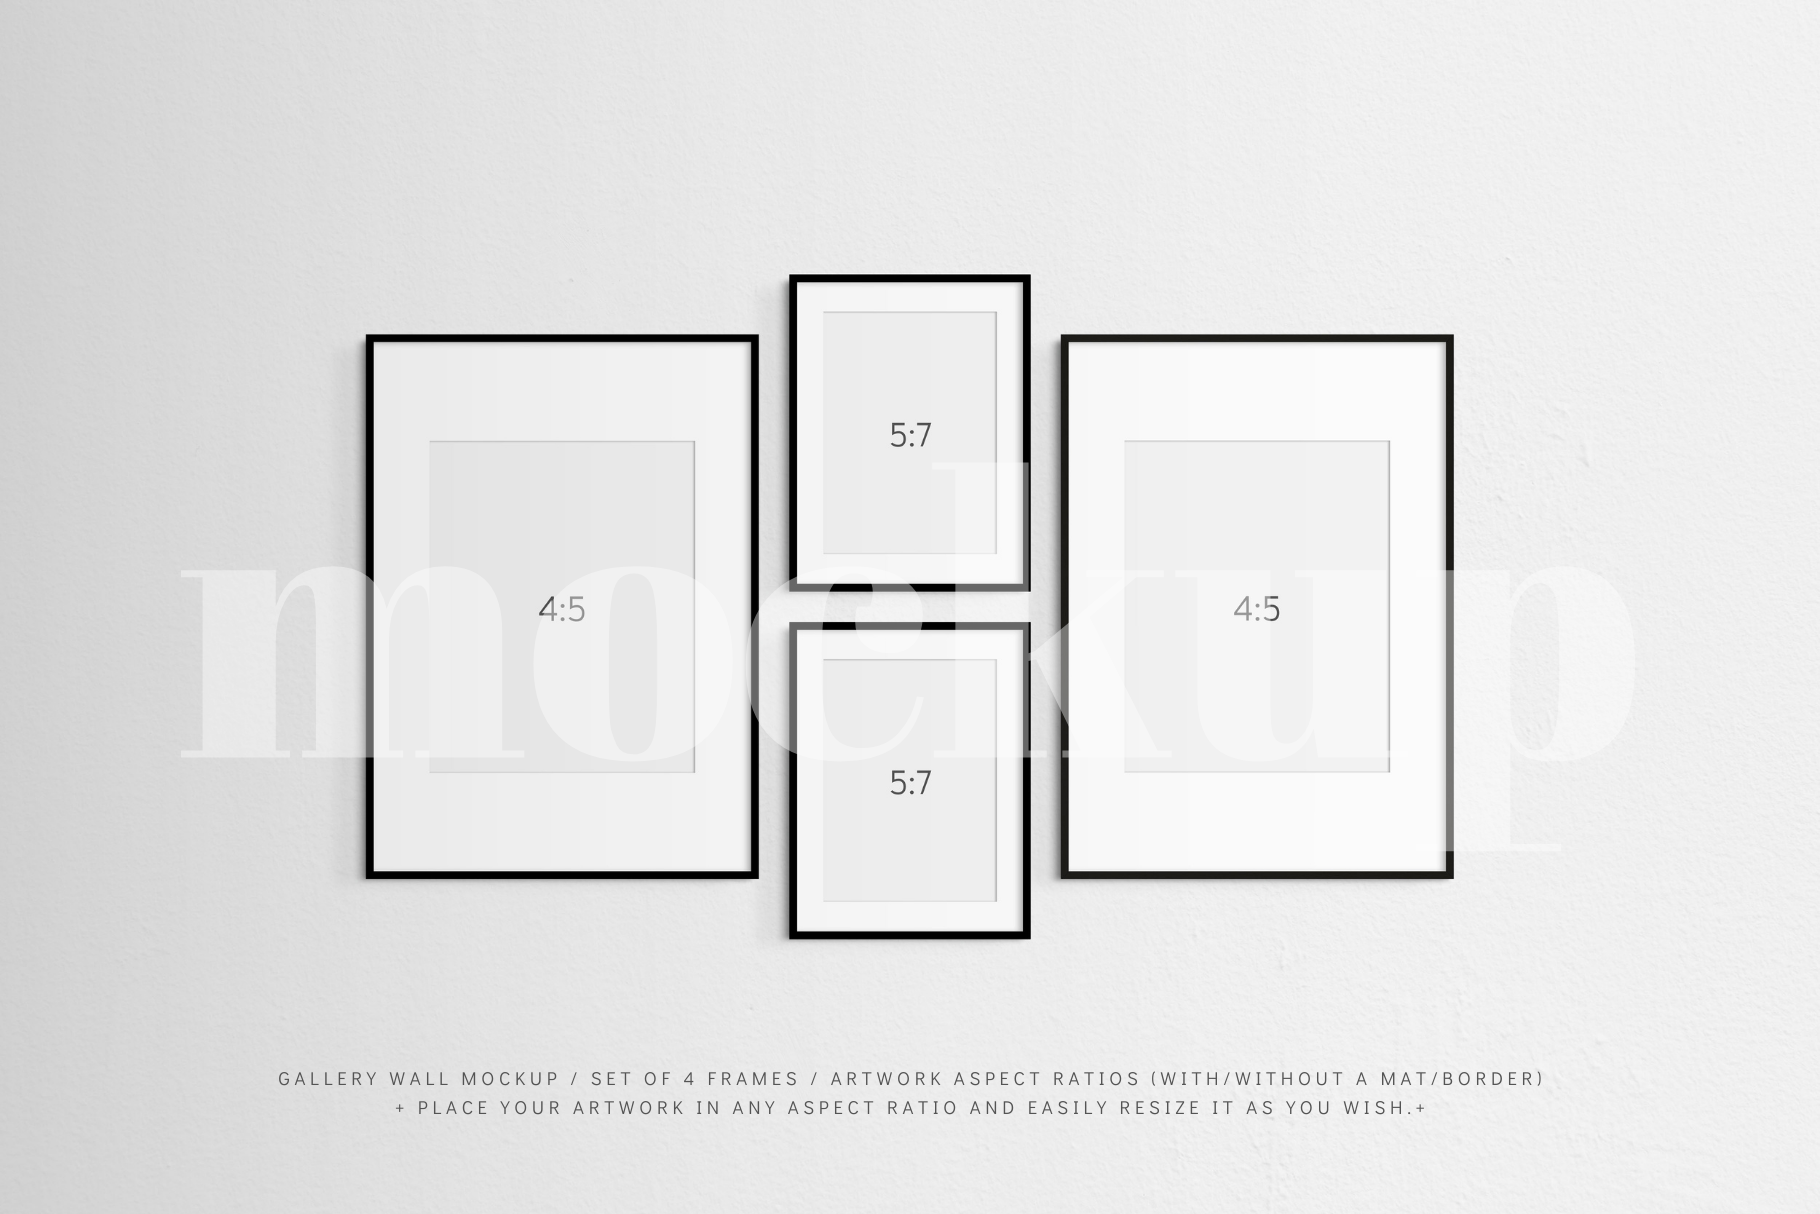 A gallery wall frame mockup that features a set of 4 thin black frames with or without a white mat (passe-partout) border.